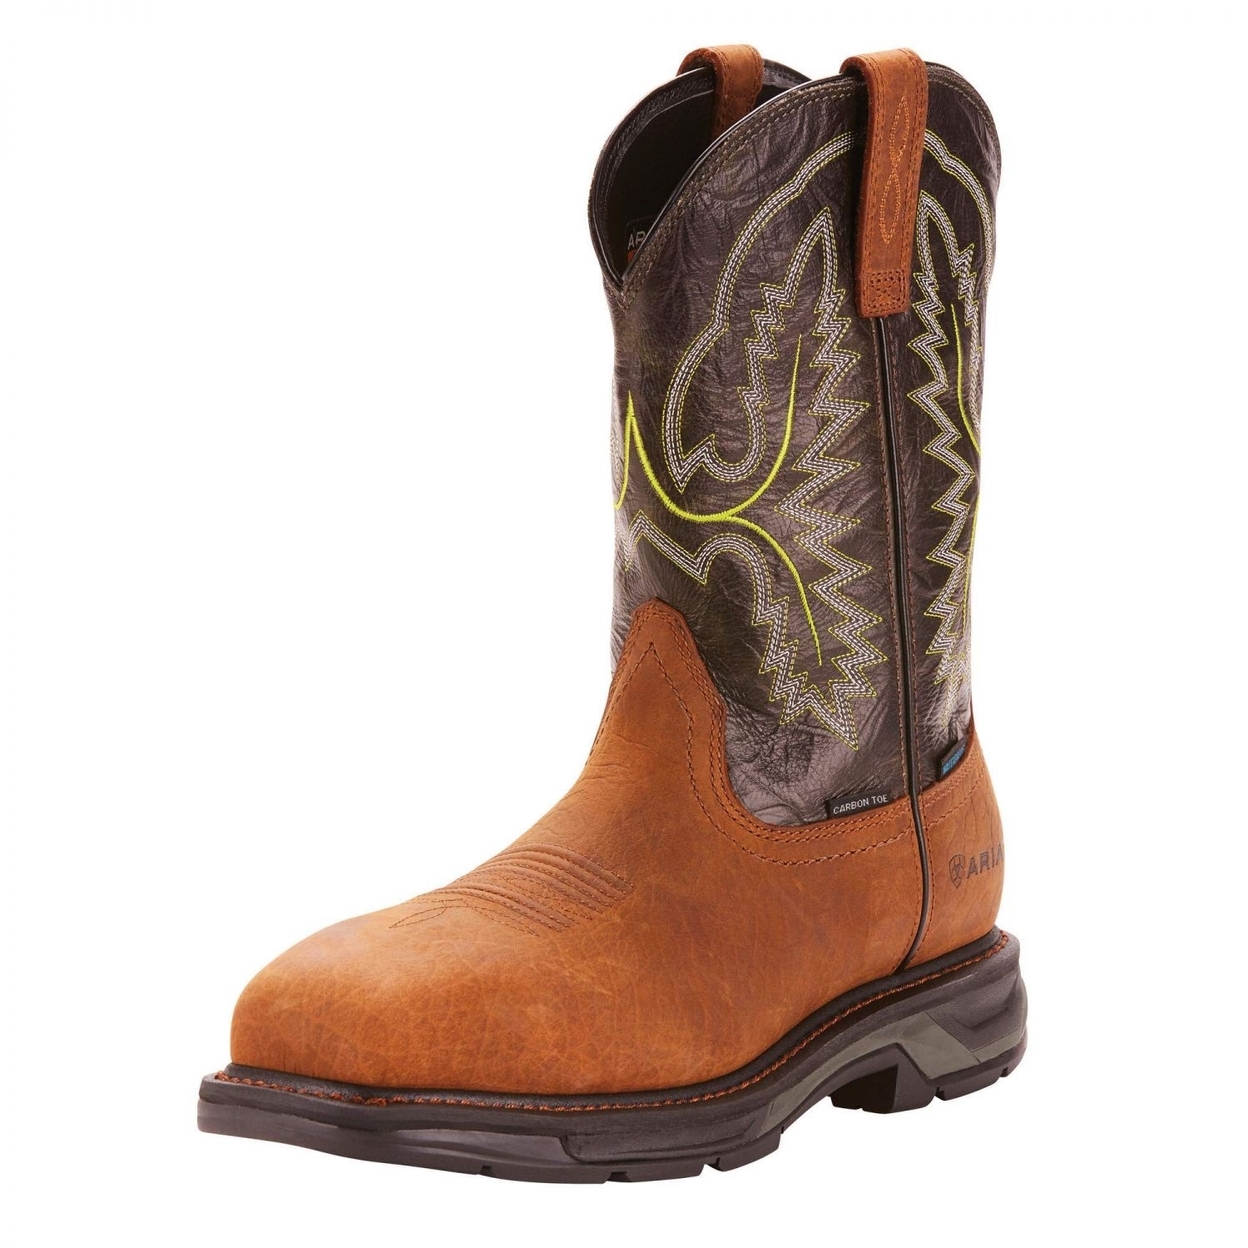 Ariat Work Men's Workhog XT H2O Carbon Toe Western Boot ONE SIZE BRK/ FOREST - BRK/ FOREST, 11.5-D